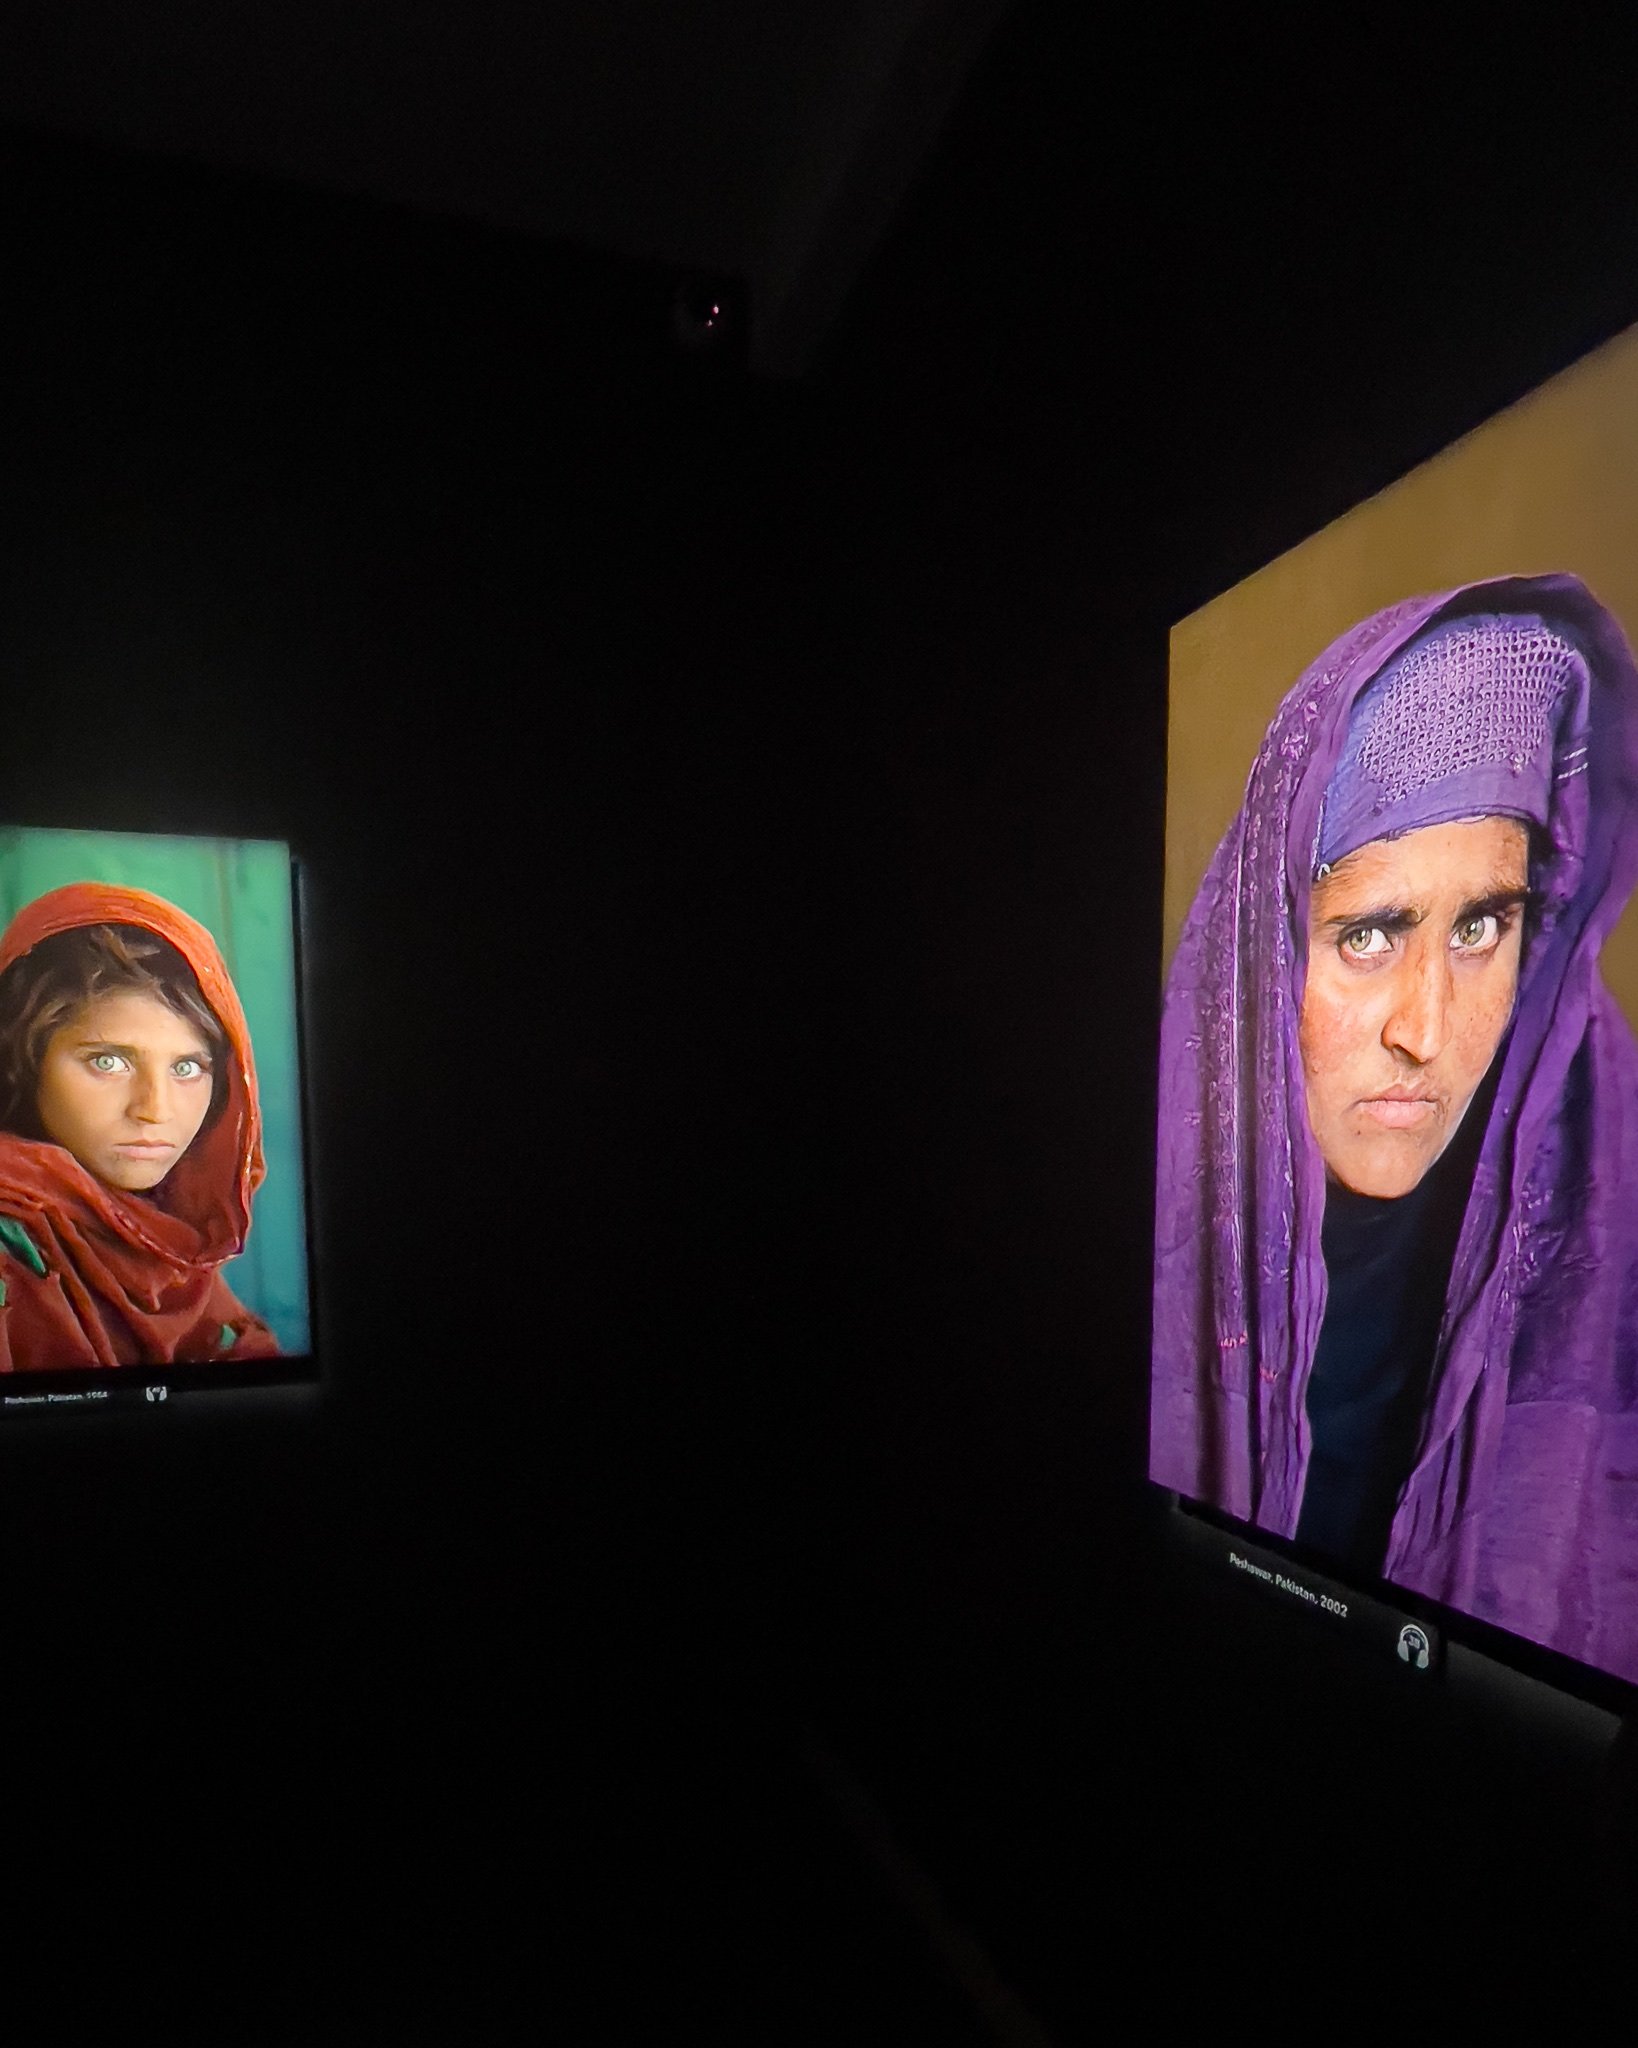 Images by Steve McCurry, temporary exhibit at Musée Maillol